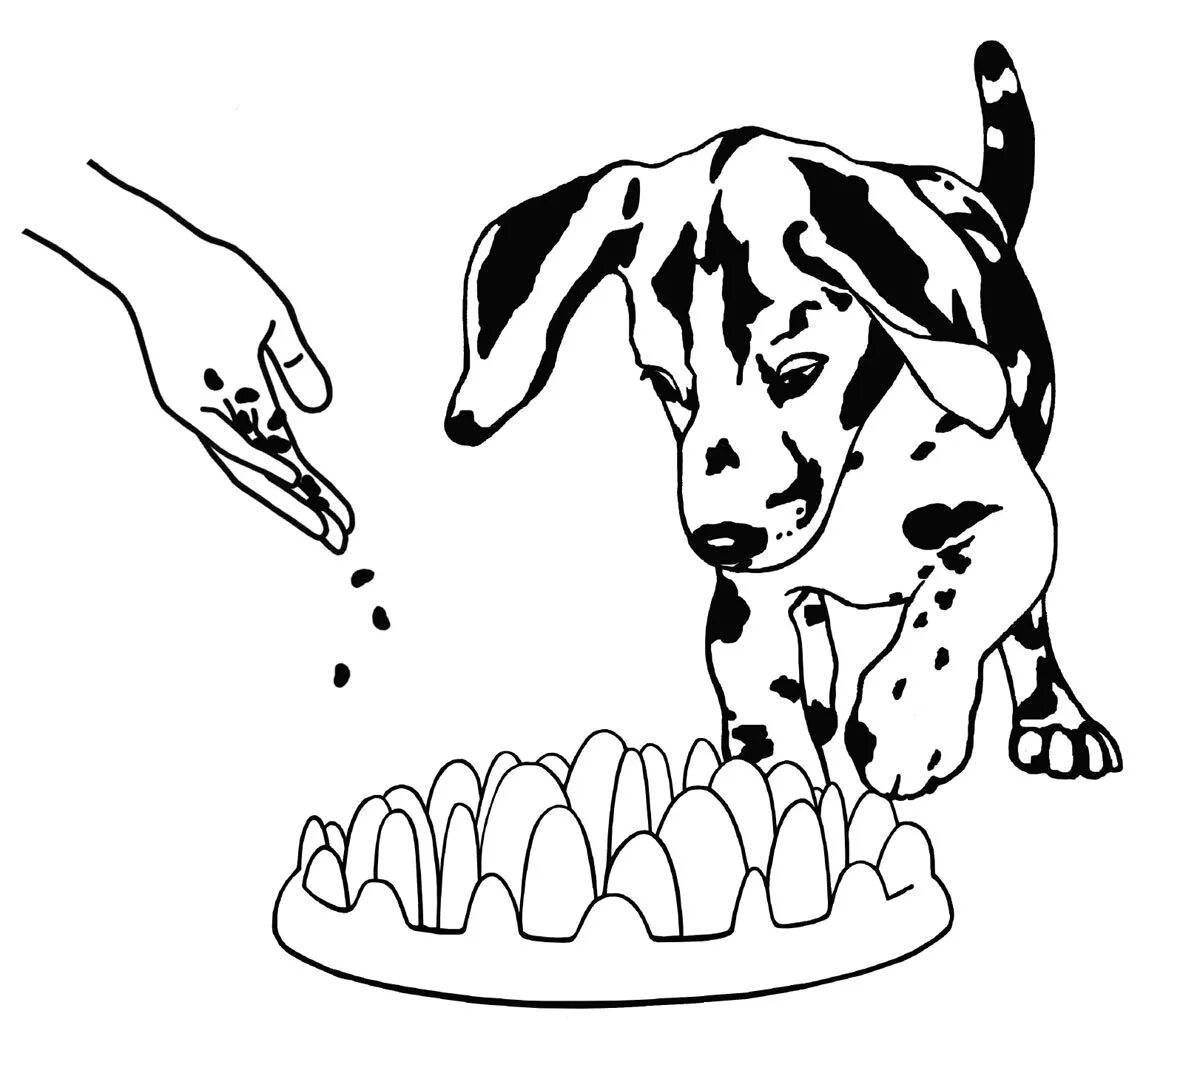 Coloring glossy bowl for dogs